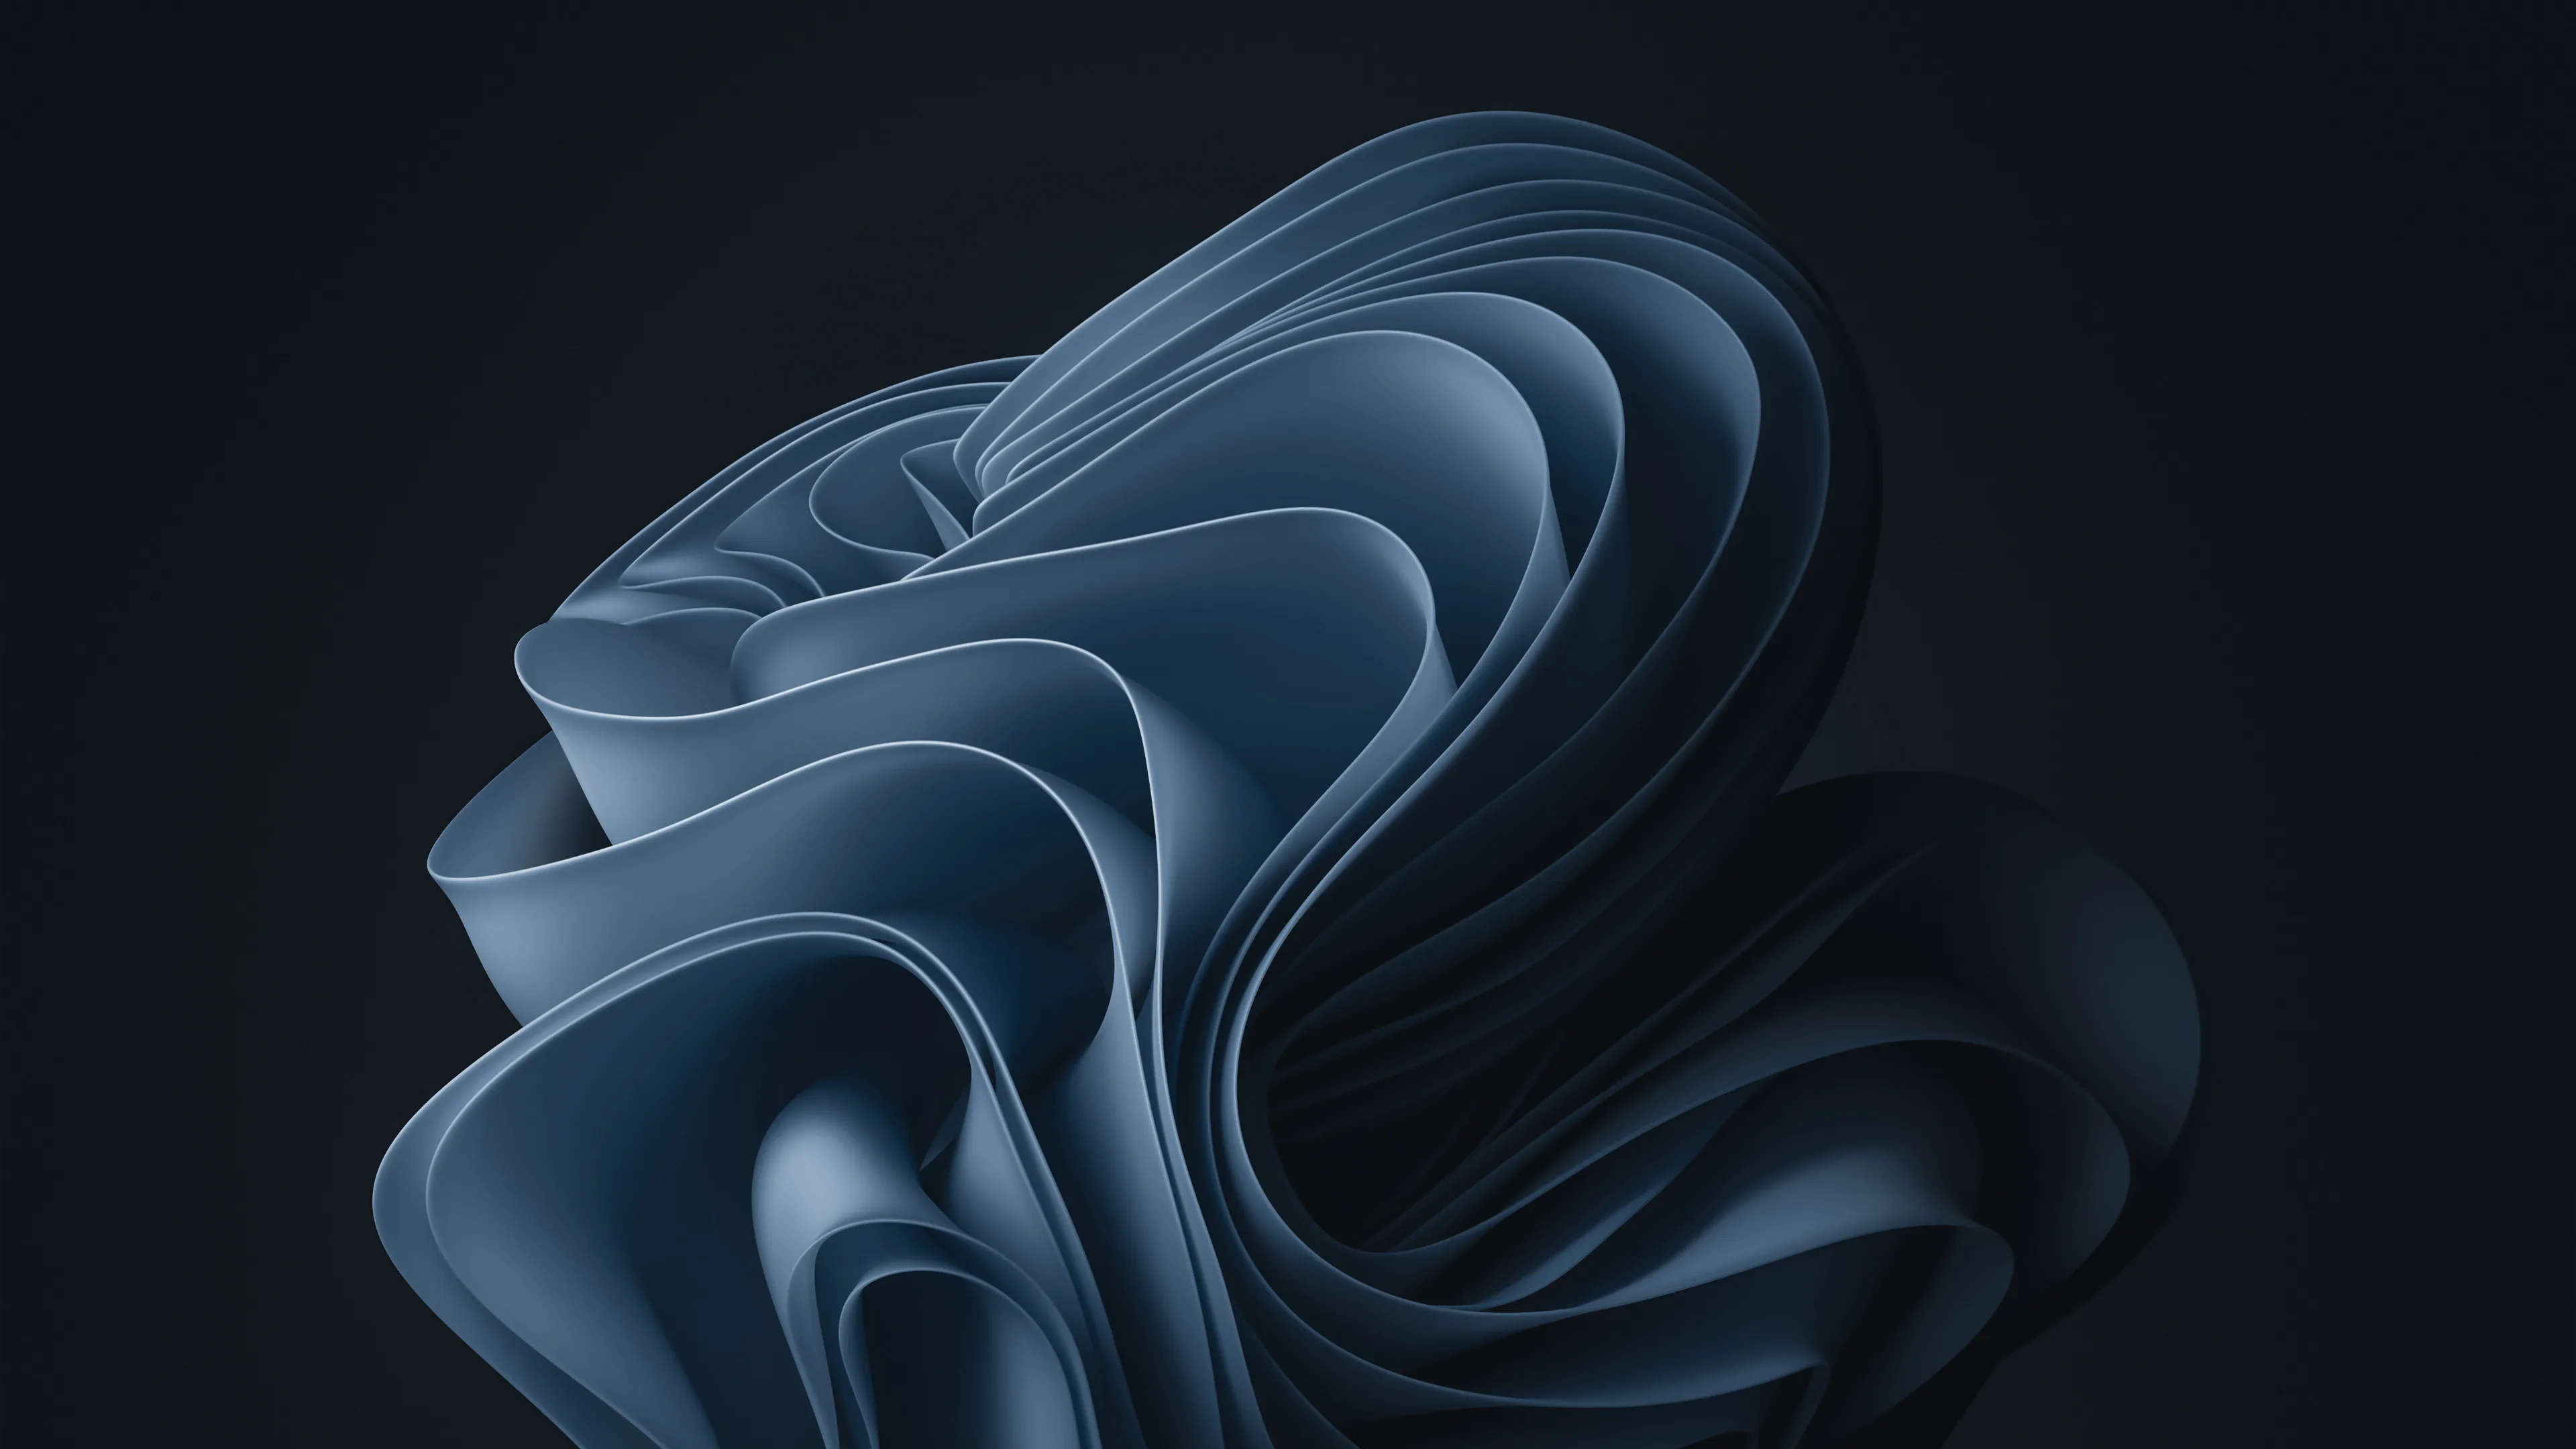 A stunning abstract grey bloom wallpaper for Windows 11 in mesmerizing 4k resolution. Enhance your desktop with this captivating and modern design.